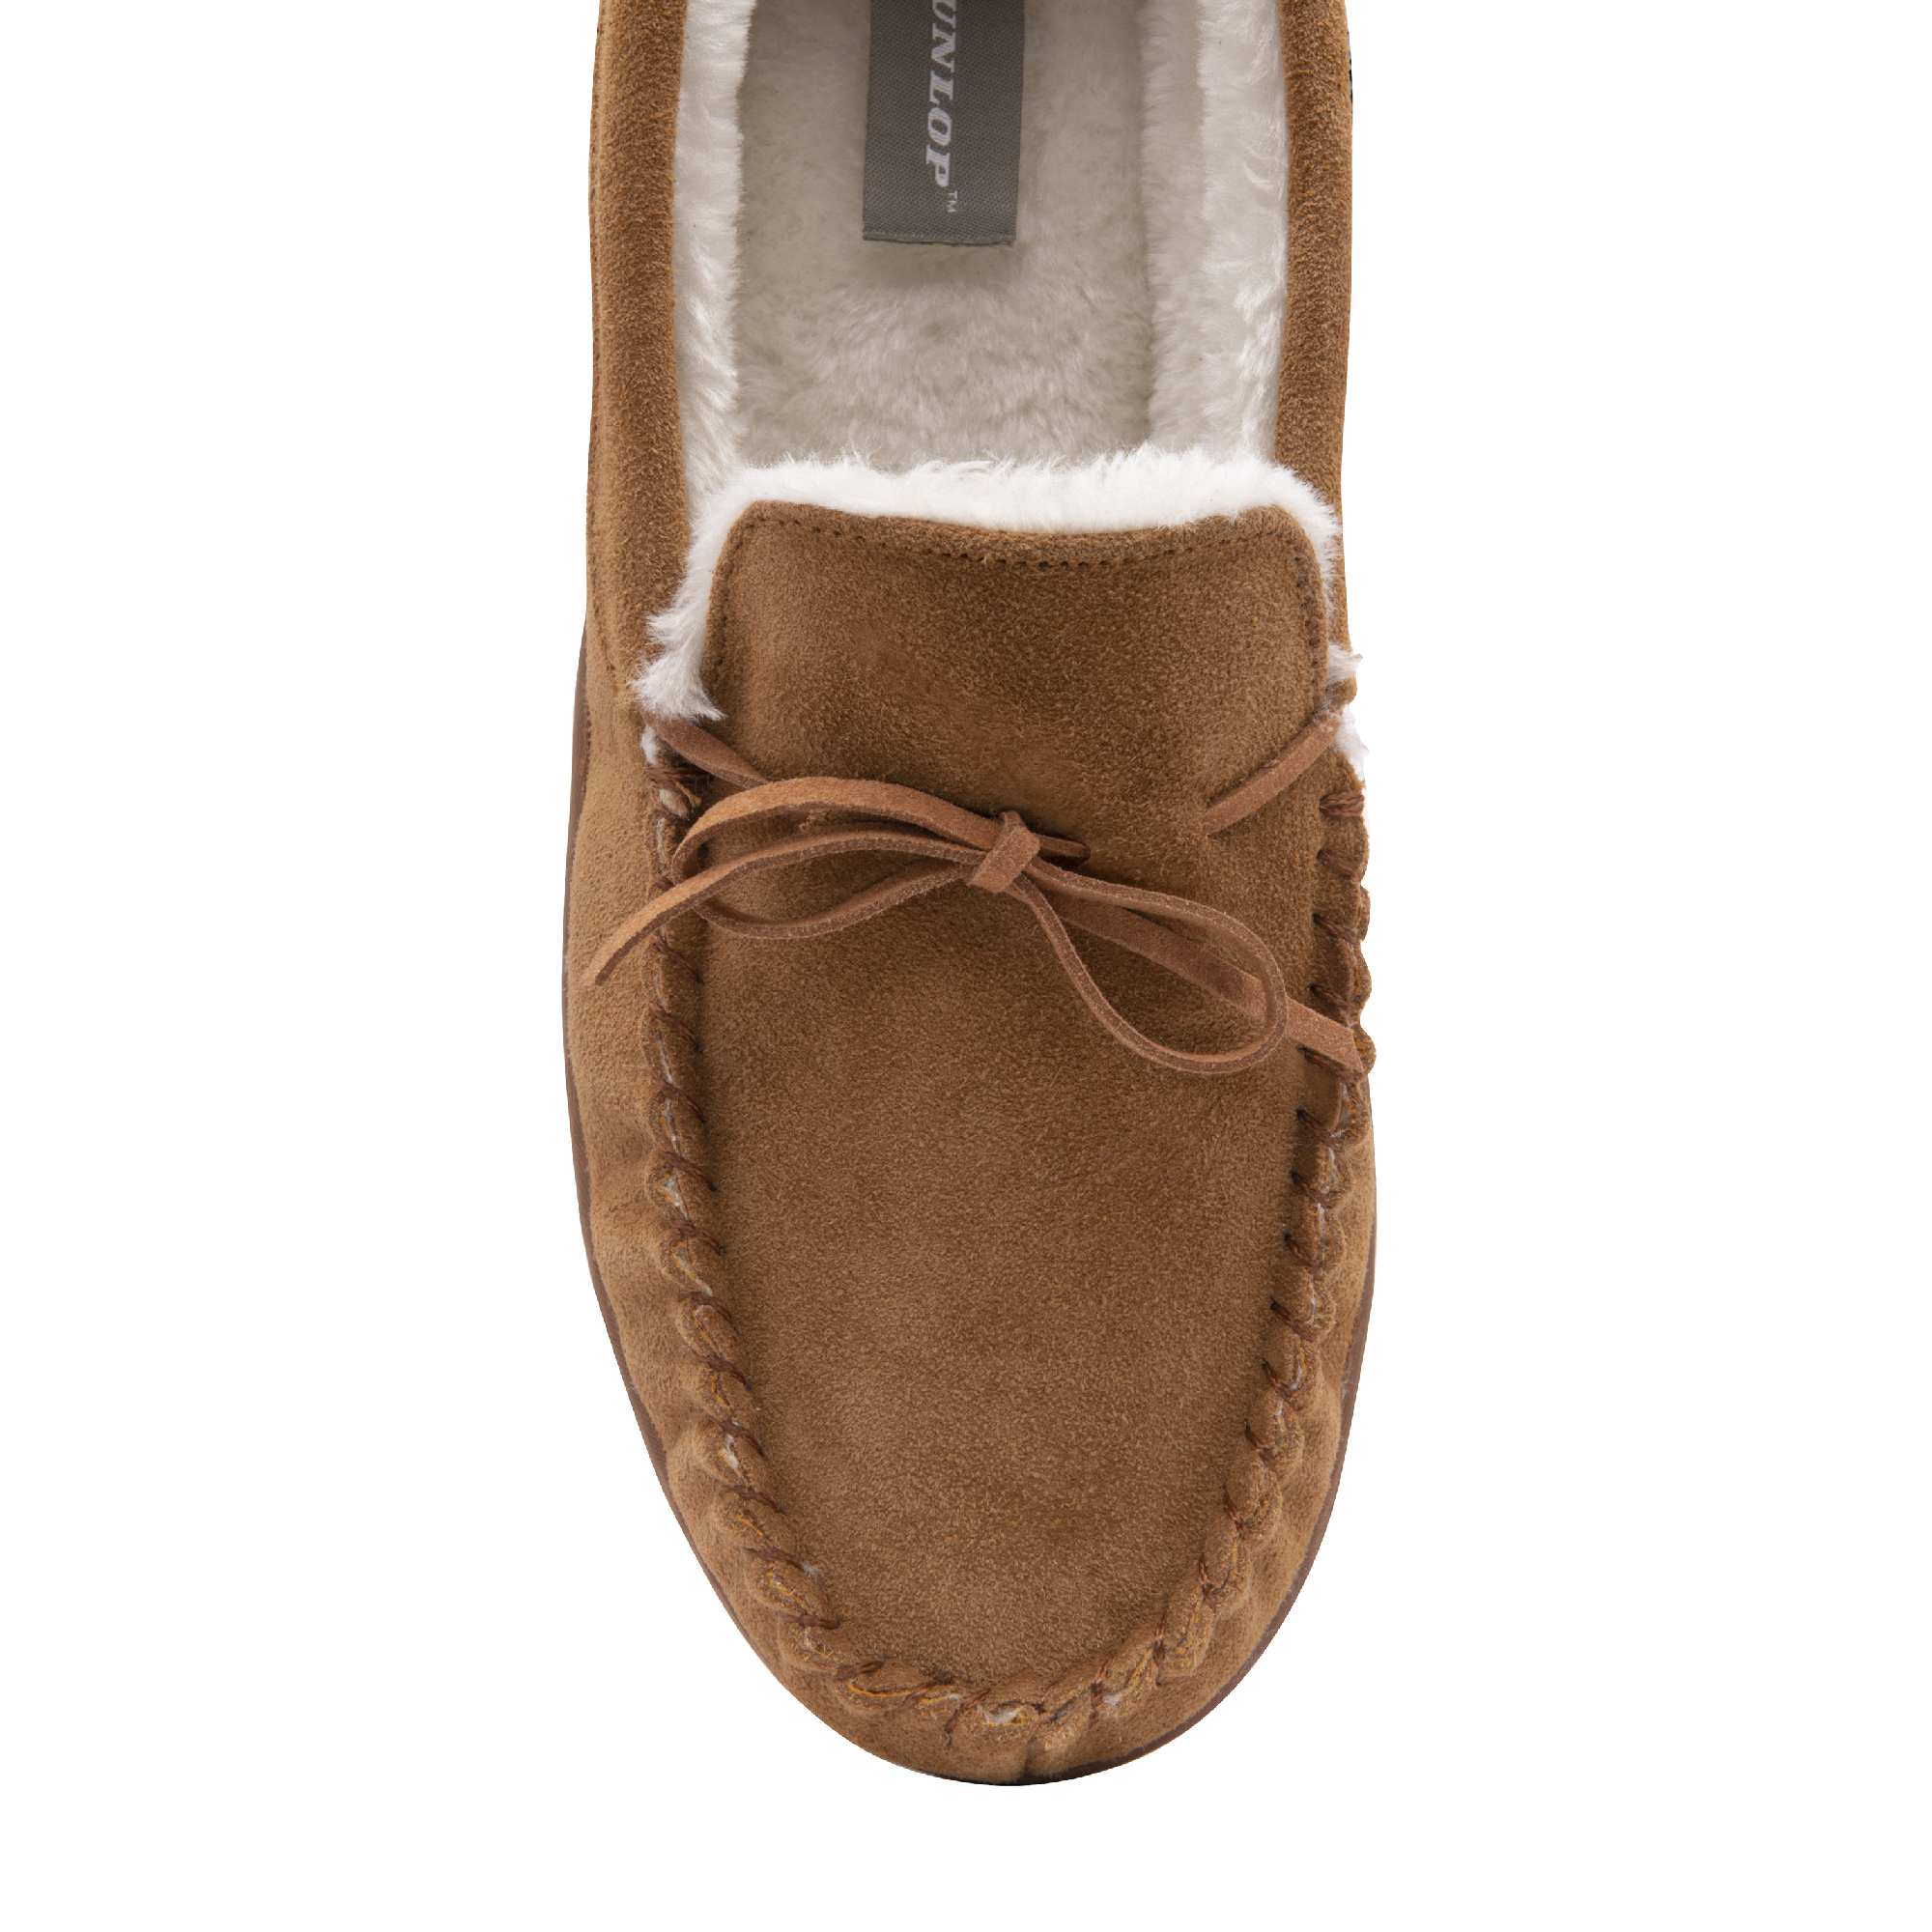 Dunlop - Mens Suede Leather Faux Fur Lined Moccasin Slippers with ...